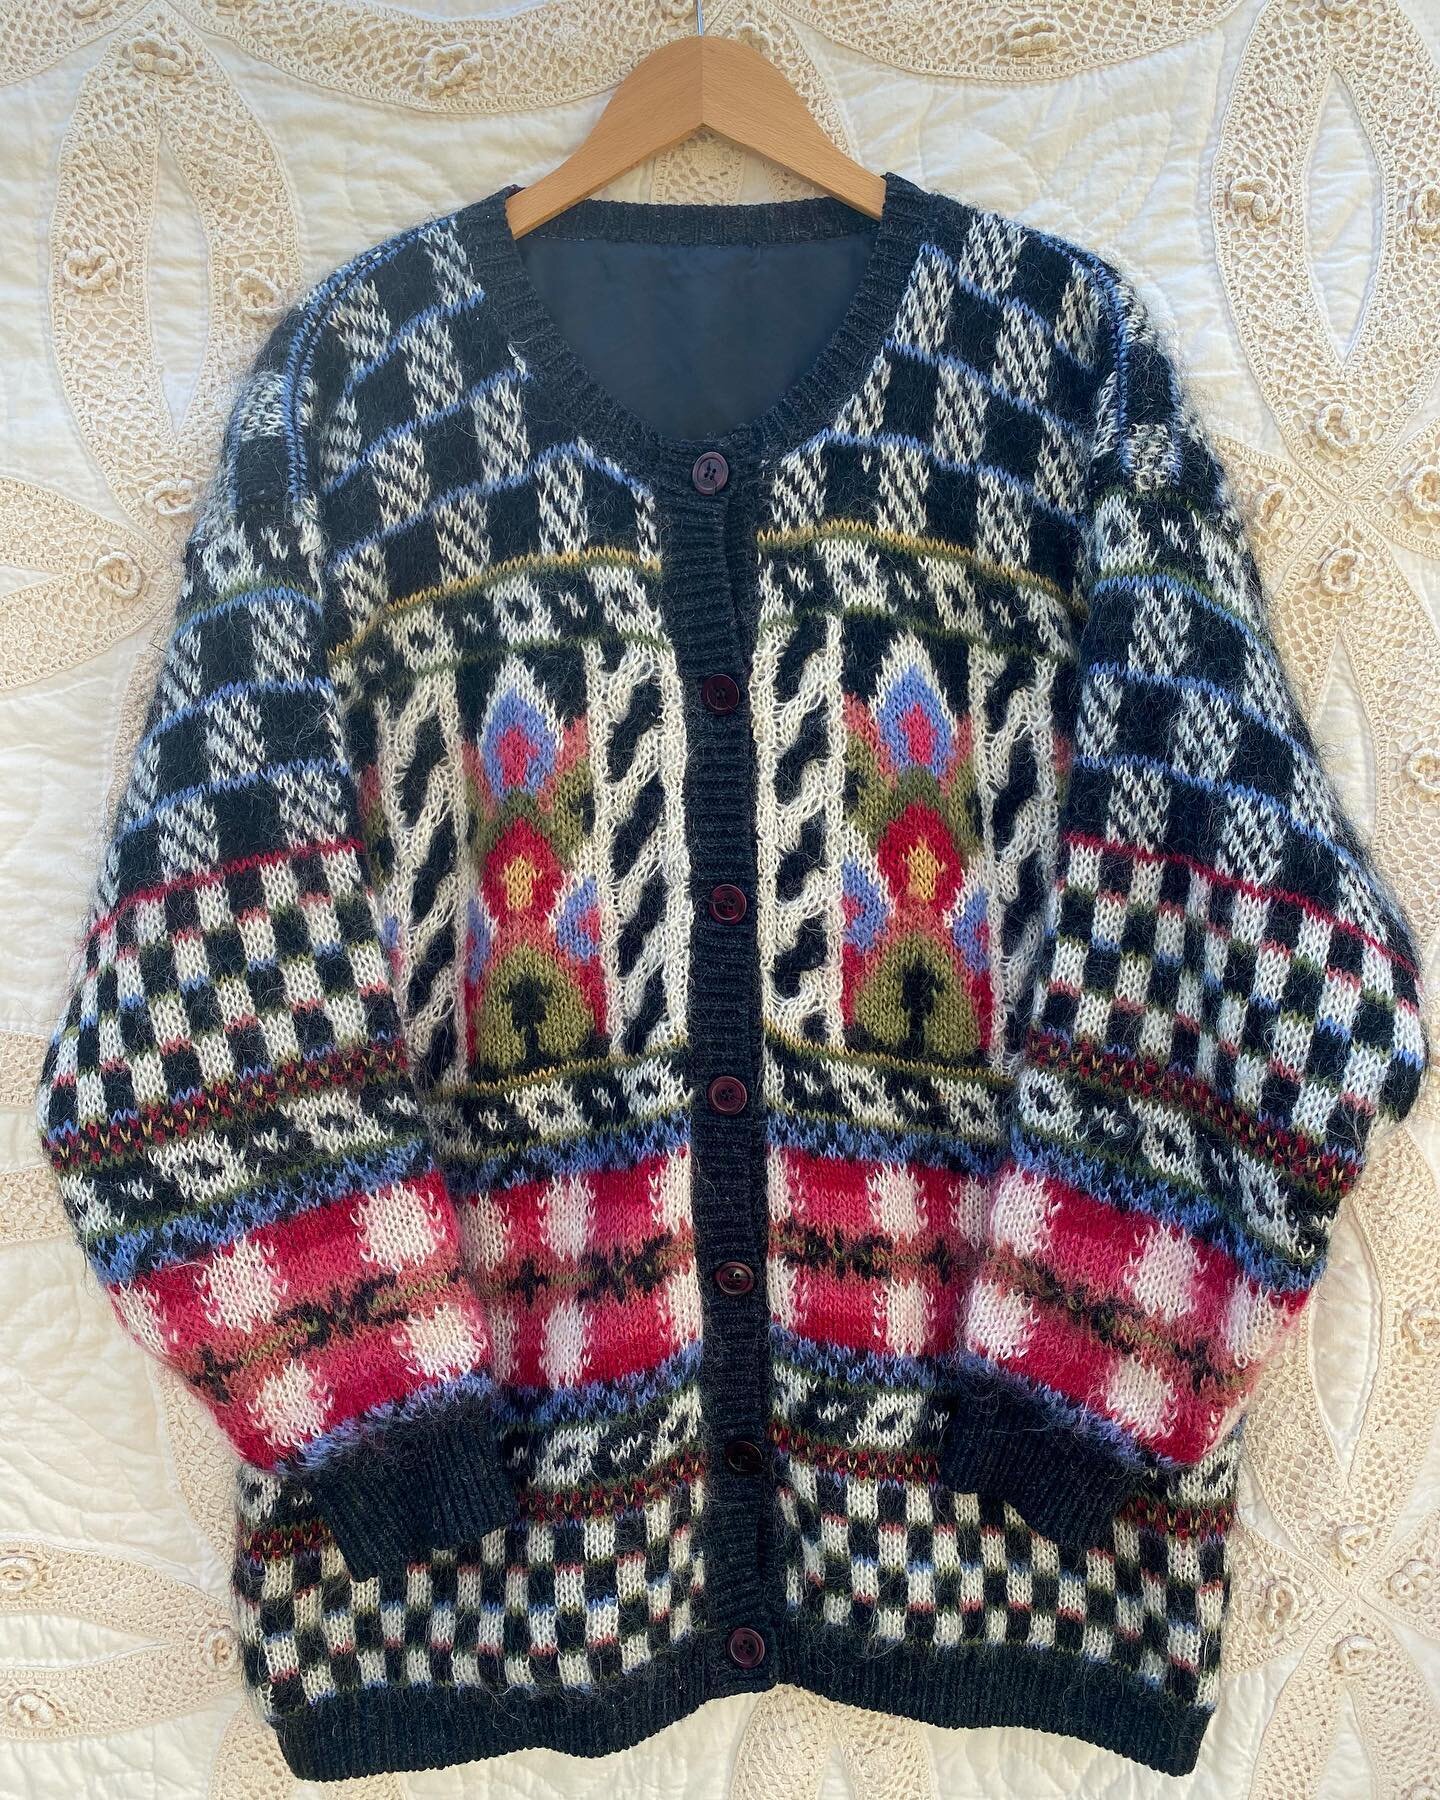 Available! 90&rsquo;s abstract floral motif mohair sweater jacket! A dream 🌷🌸🌼🌻

Details: 
Best fits sizes M - XL depending on desired fit. 
Measures 30&rdquo; in length and 25&rdquo; across chest laying flat.

Mohair / wool / acrylic blend fully